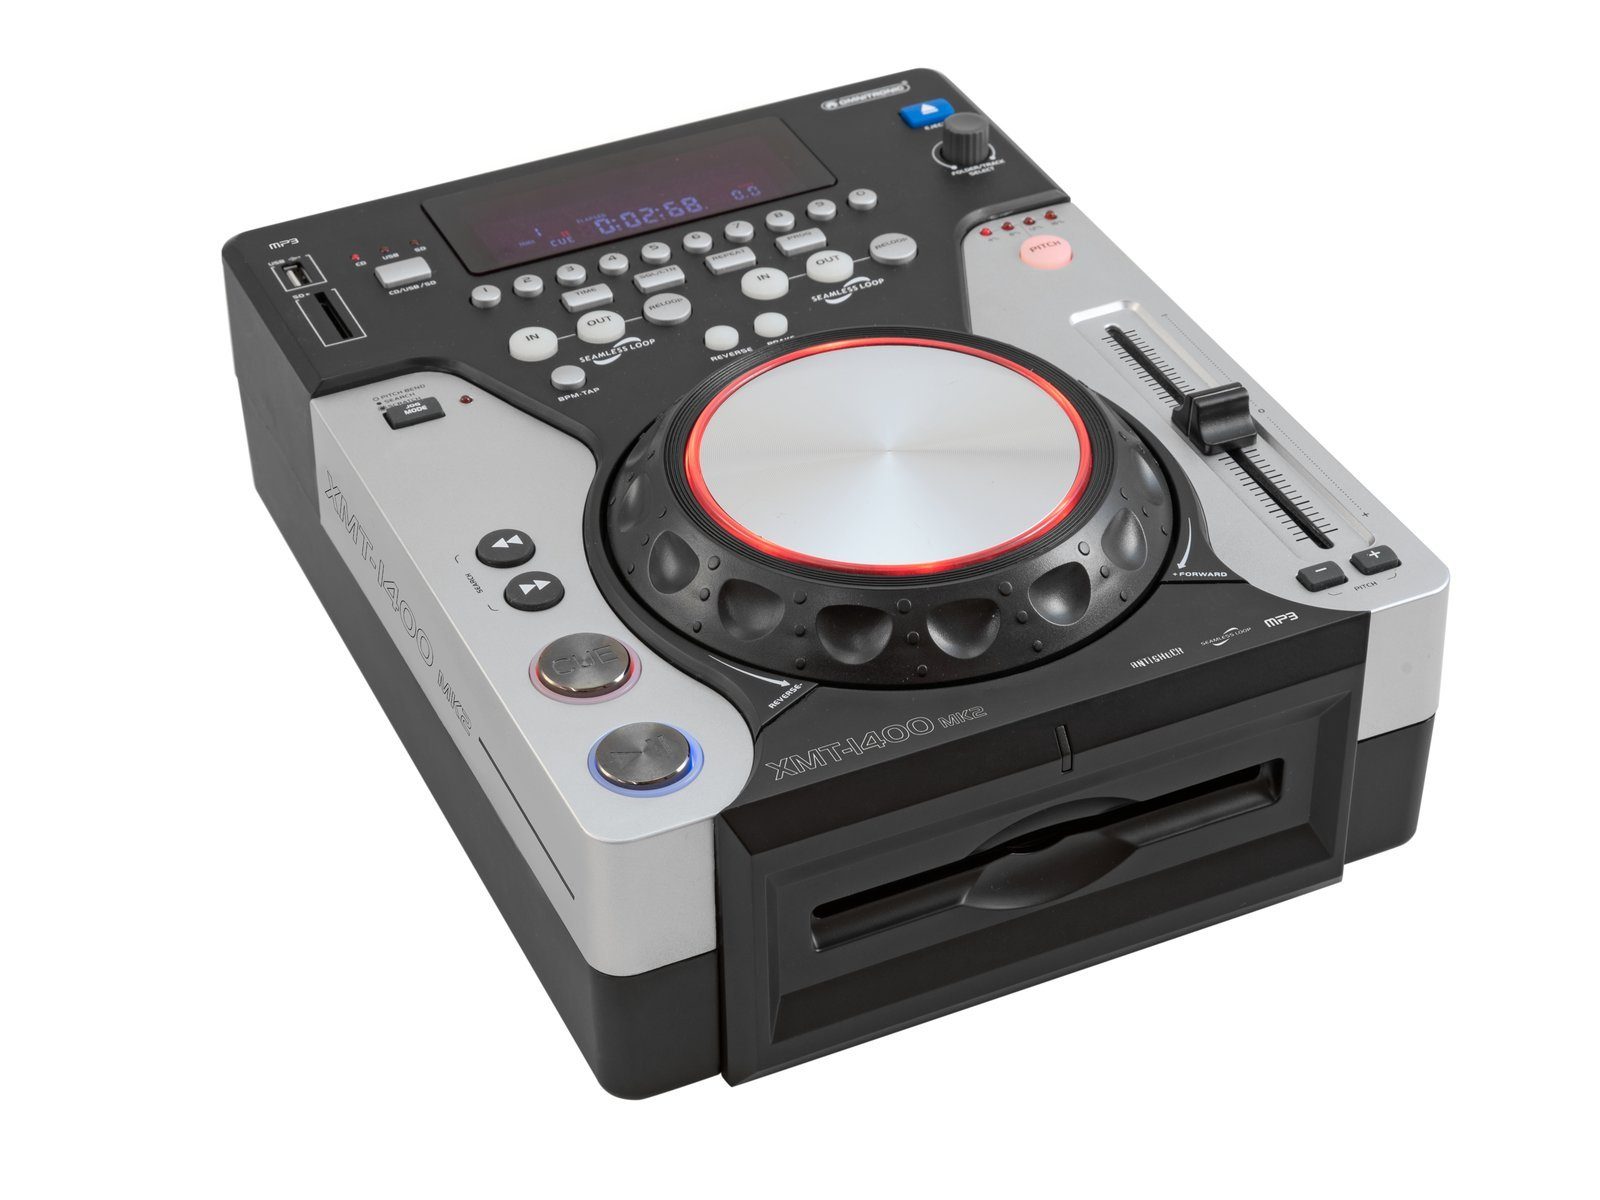 Player MK2 Omnitronic Tabletop-CD-Player XMT-1400 Stereo-CD